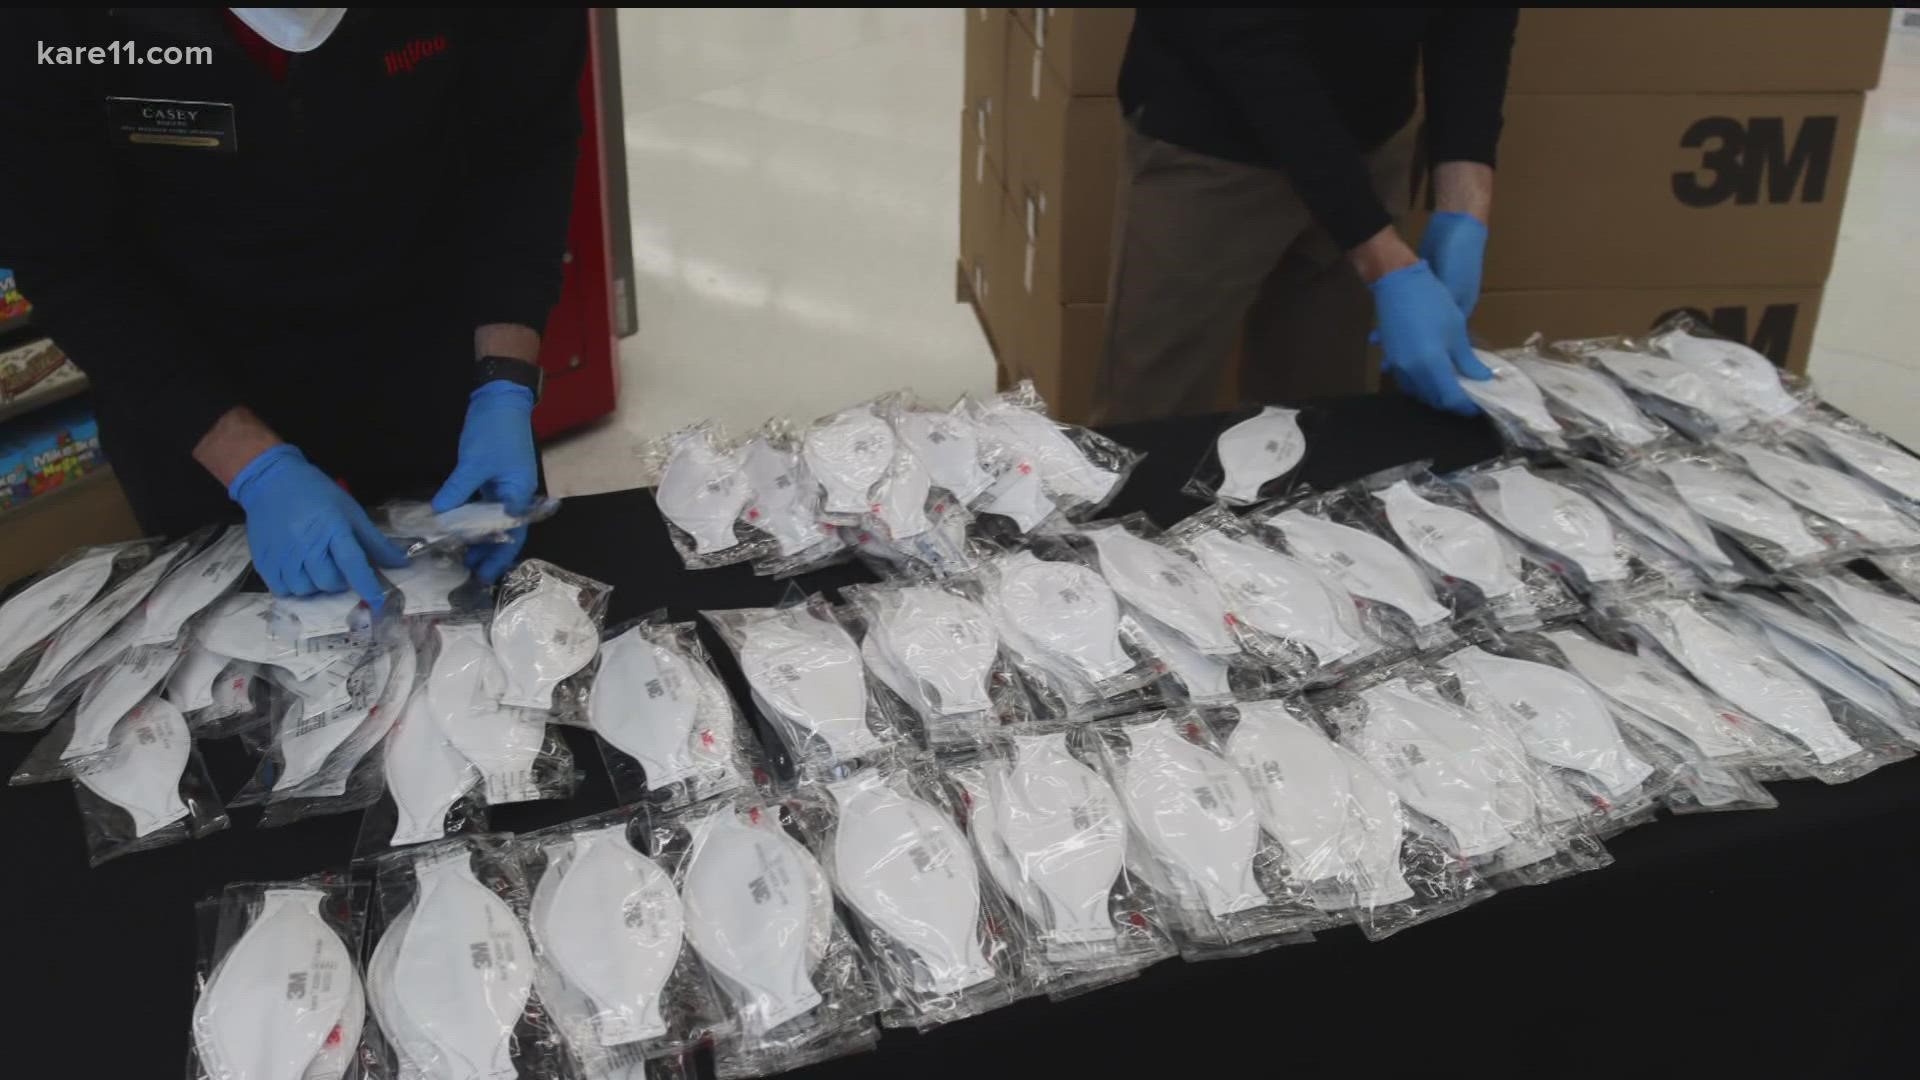 A spokeswoman with Hy-vee told KARE 11 the first shipments of N95 masks arrived last Friday and all 275 Hy-Vee pharmacies in the Midwest will have masks this week.